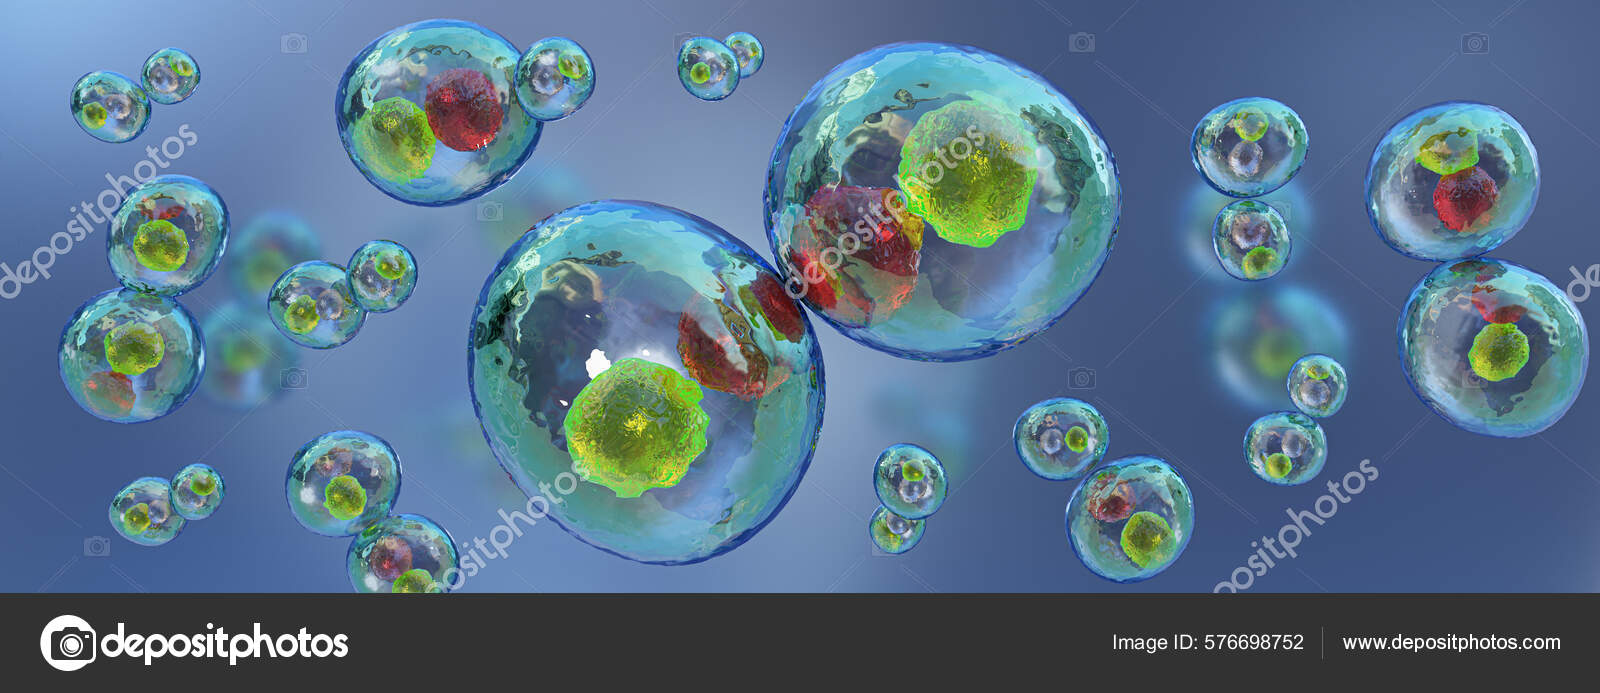 Cell Division Microscope Human Cell Animal Cells Illustration Stock Photo  by ©GrafiThink 576698752